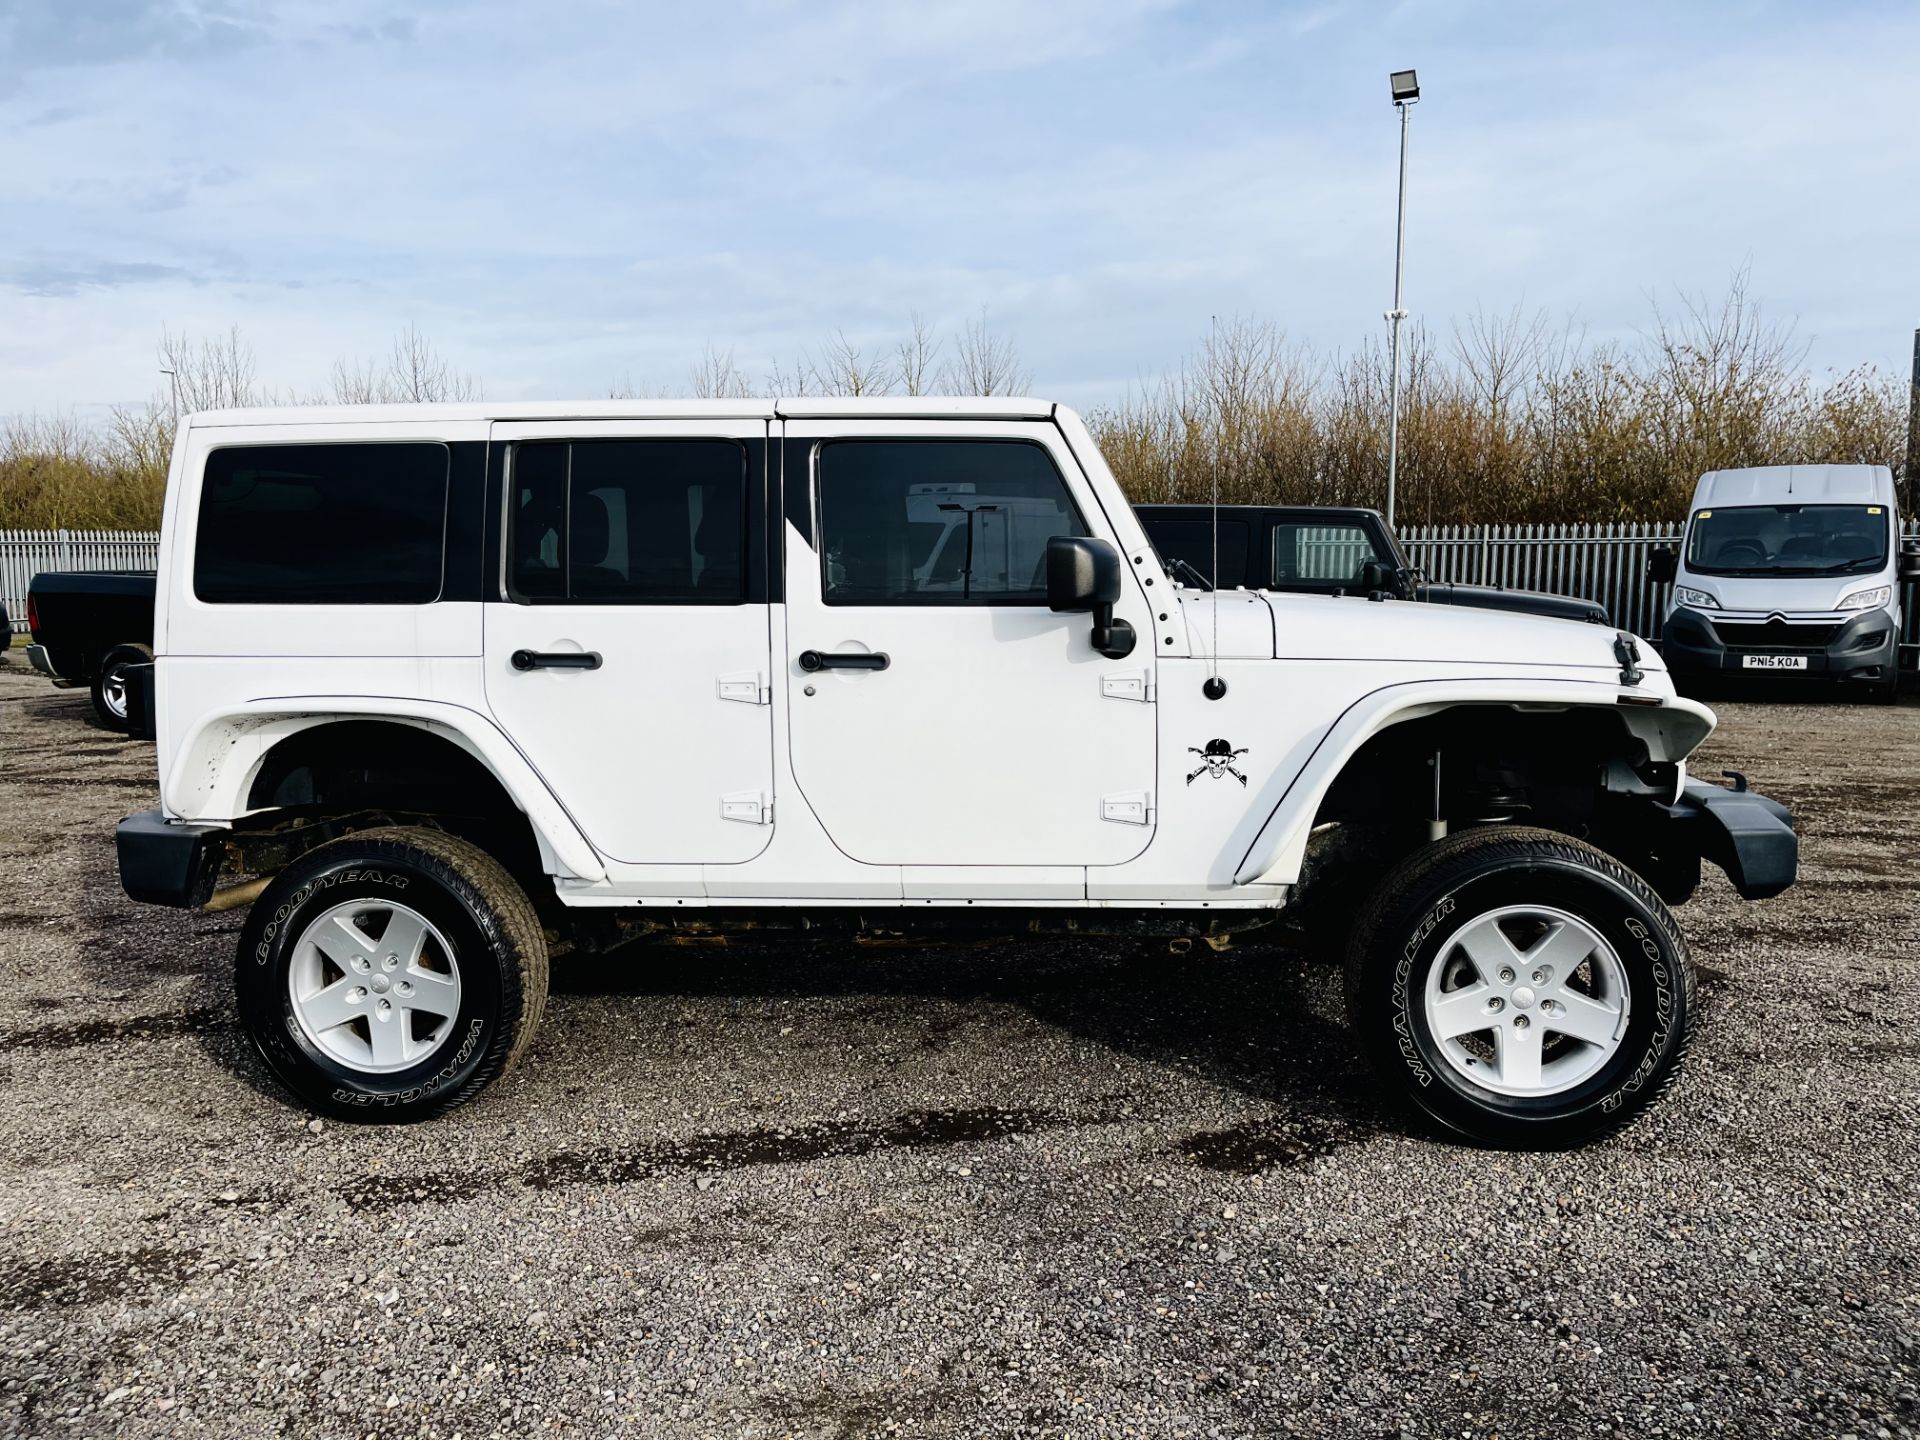 **ON SALE ** Jeep Wrangler 3.6L V6 Unlimited Sahara 4WD Convertible HardTop '2014 Year' - A/C - Image 6 of 24